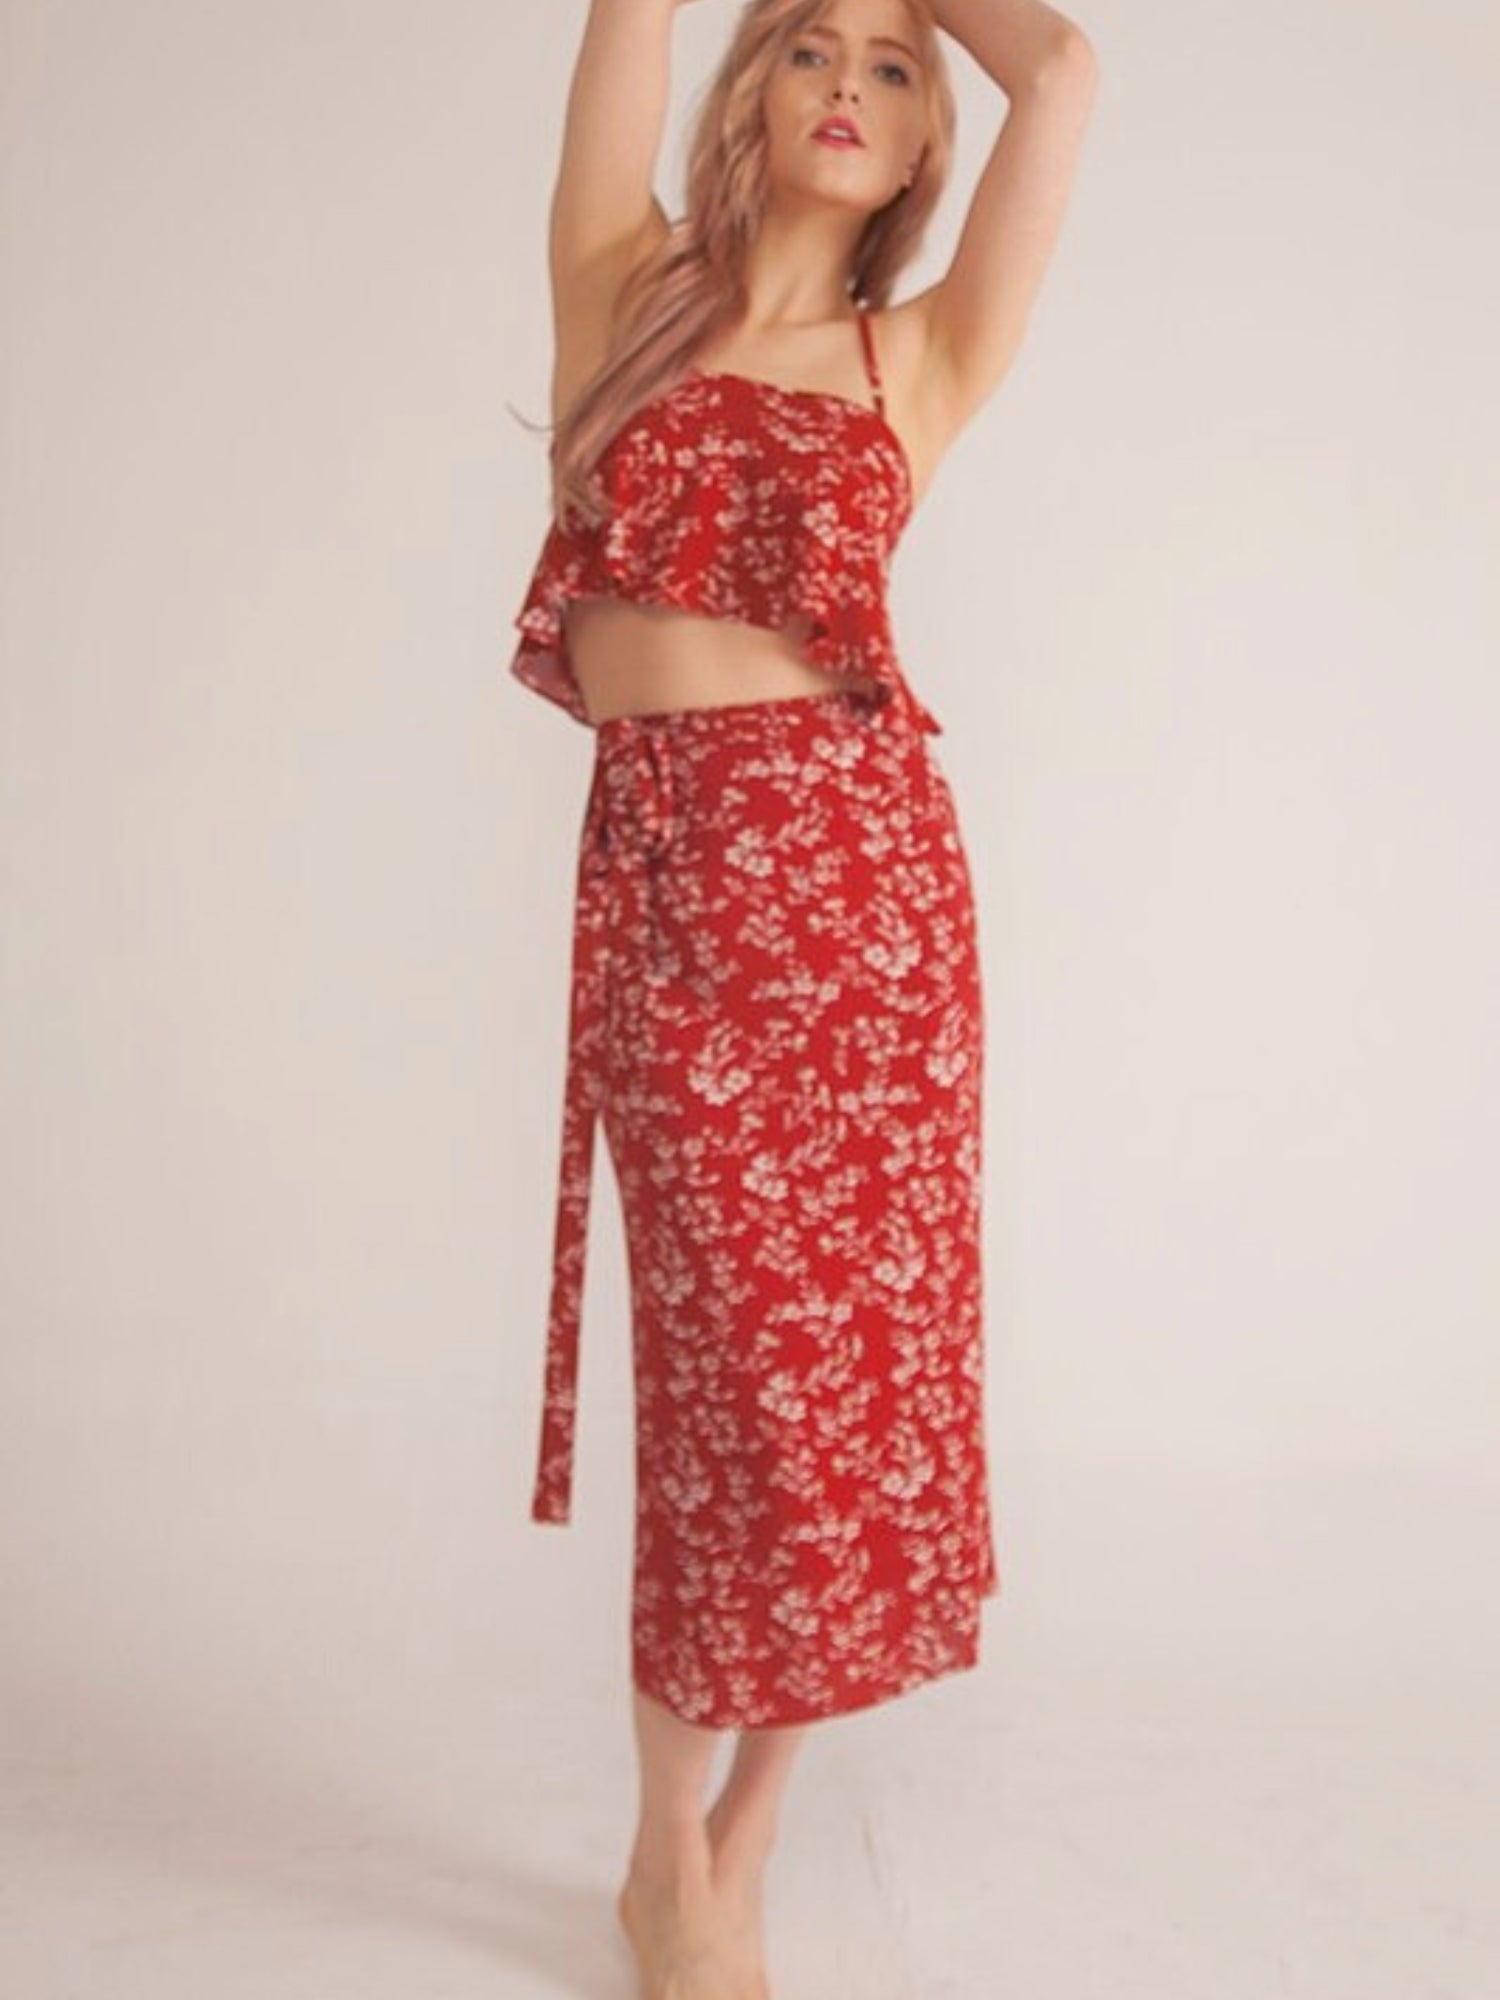 The Paradise Camisole Top - Let's have a love core spring in The Paradise Camisole Top. Made in a rust shade of red and features white floral print. This top is a tie front closure which allows you to adjust the top depending on how much coverage you're l